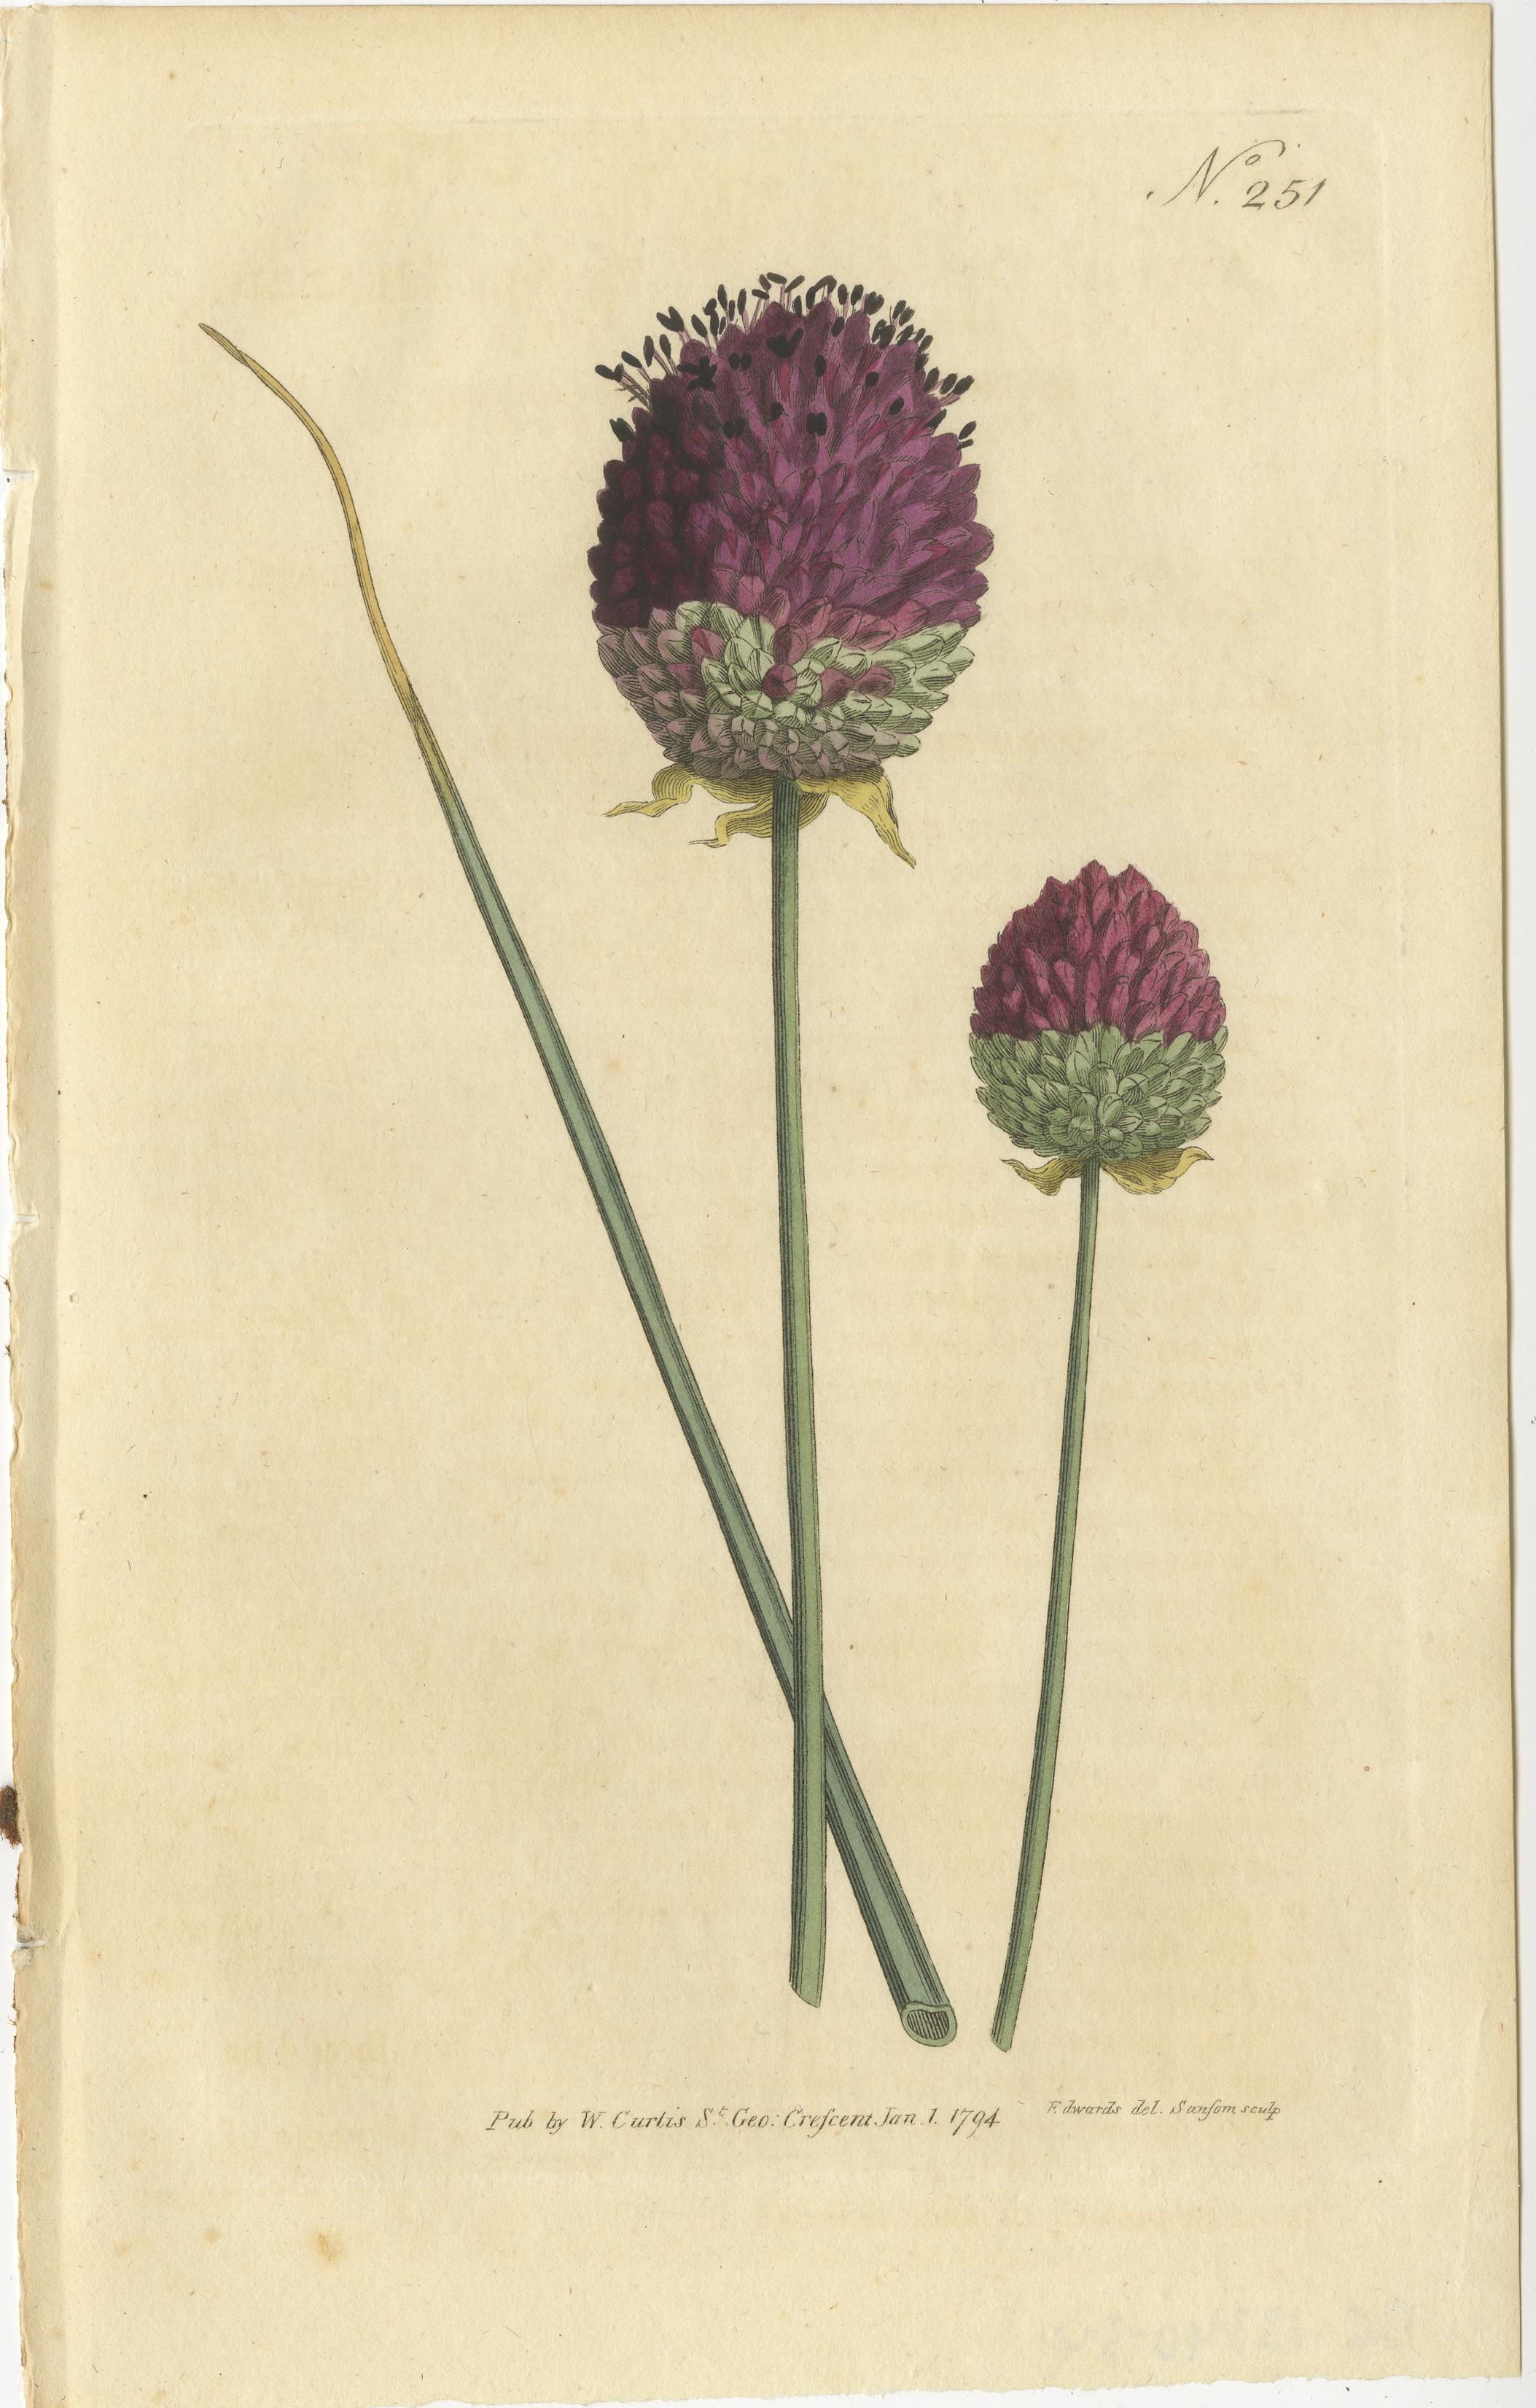 18th Century Set of 2 Antique Botany Prints - Sweet Scabious - Purple-Headed Garlic For Sale